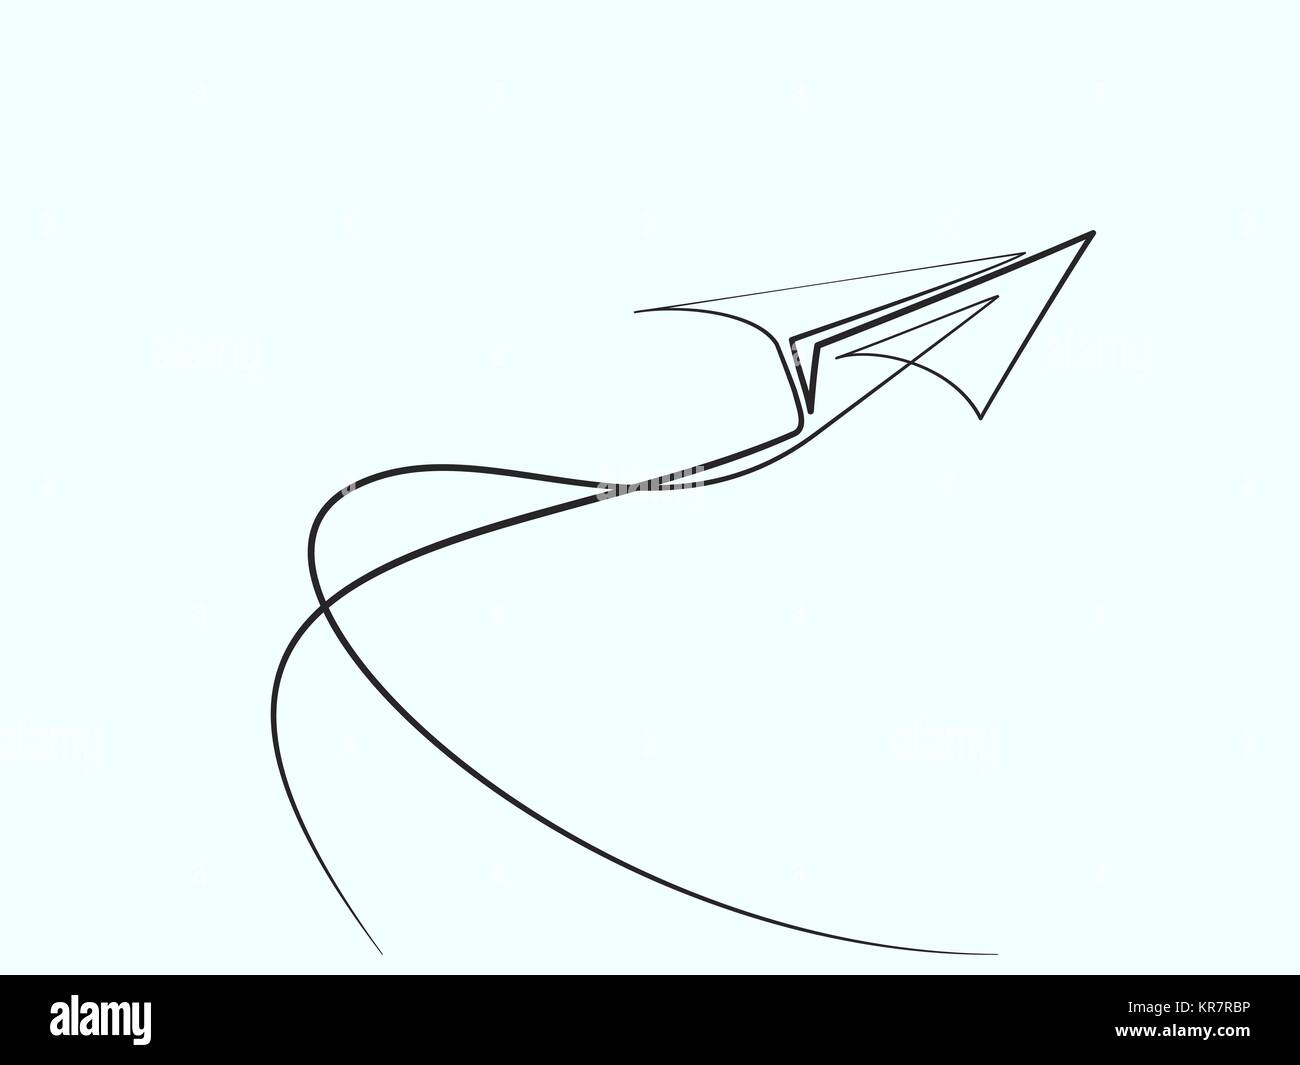 Continuous line drawing of paper airplane Stock Vector